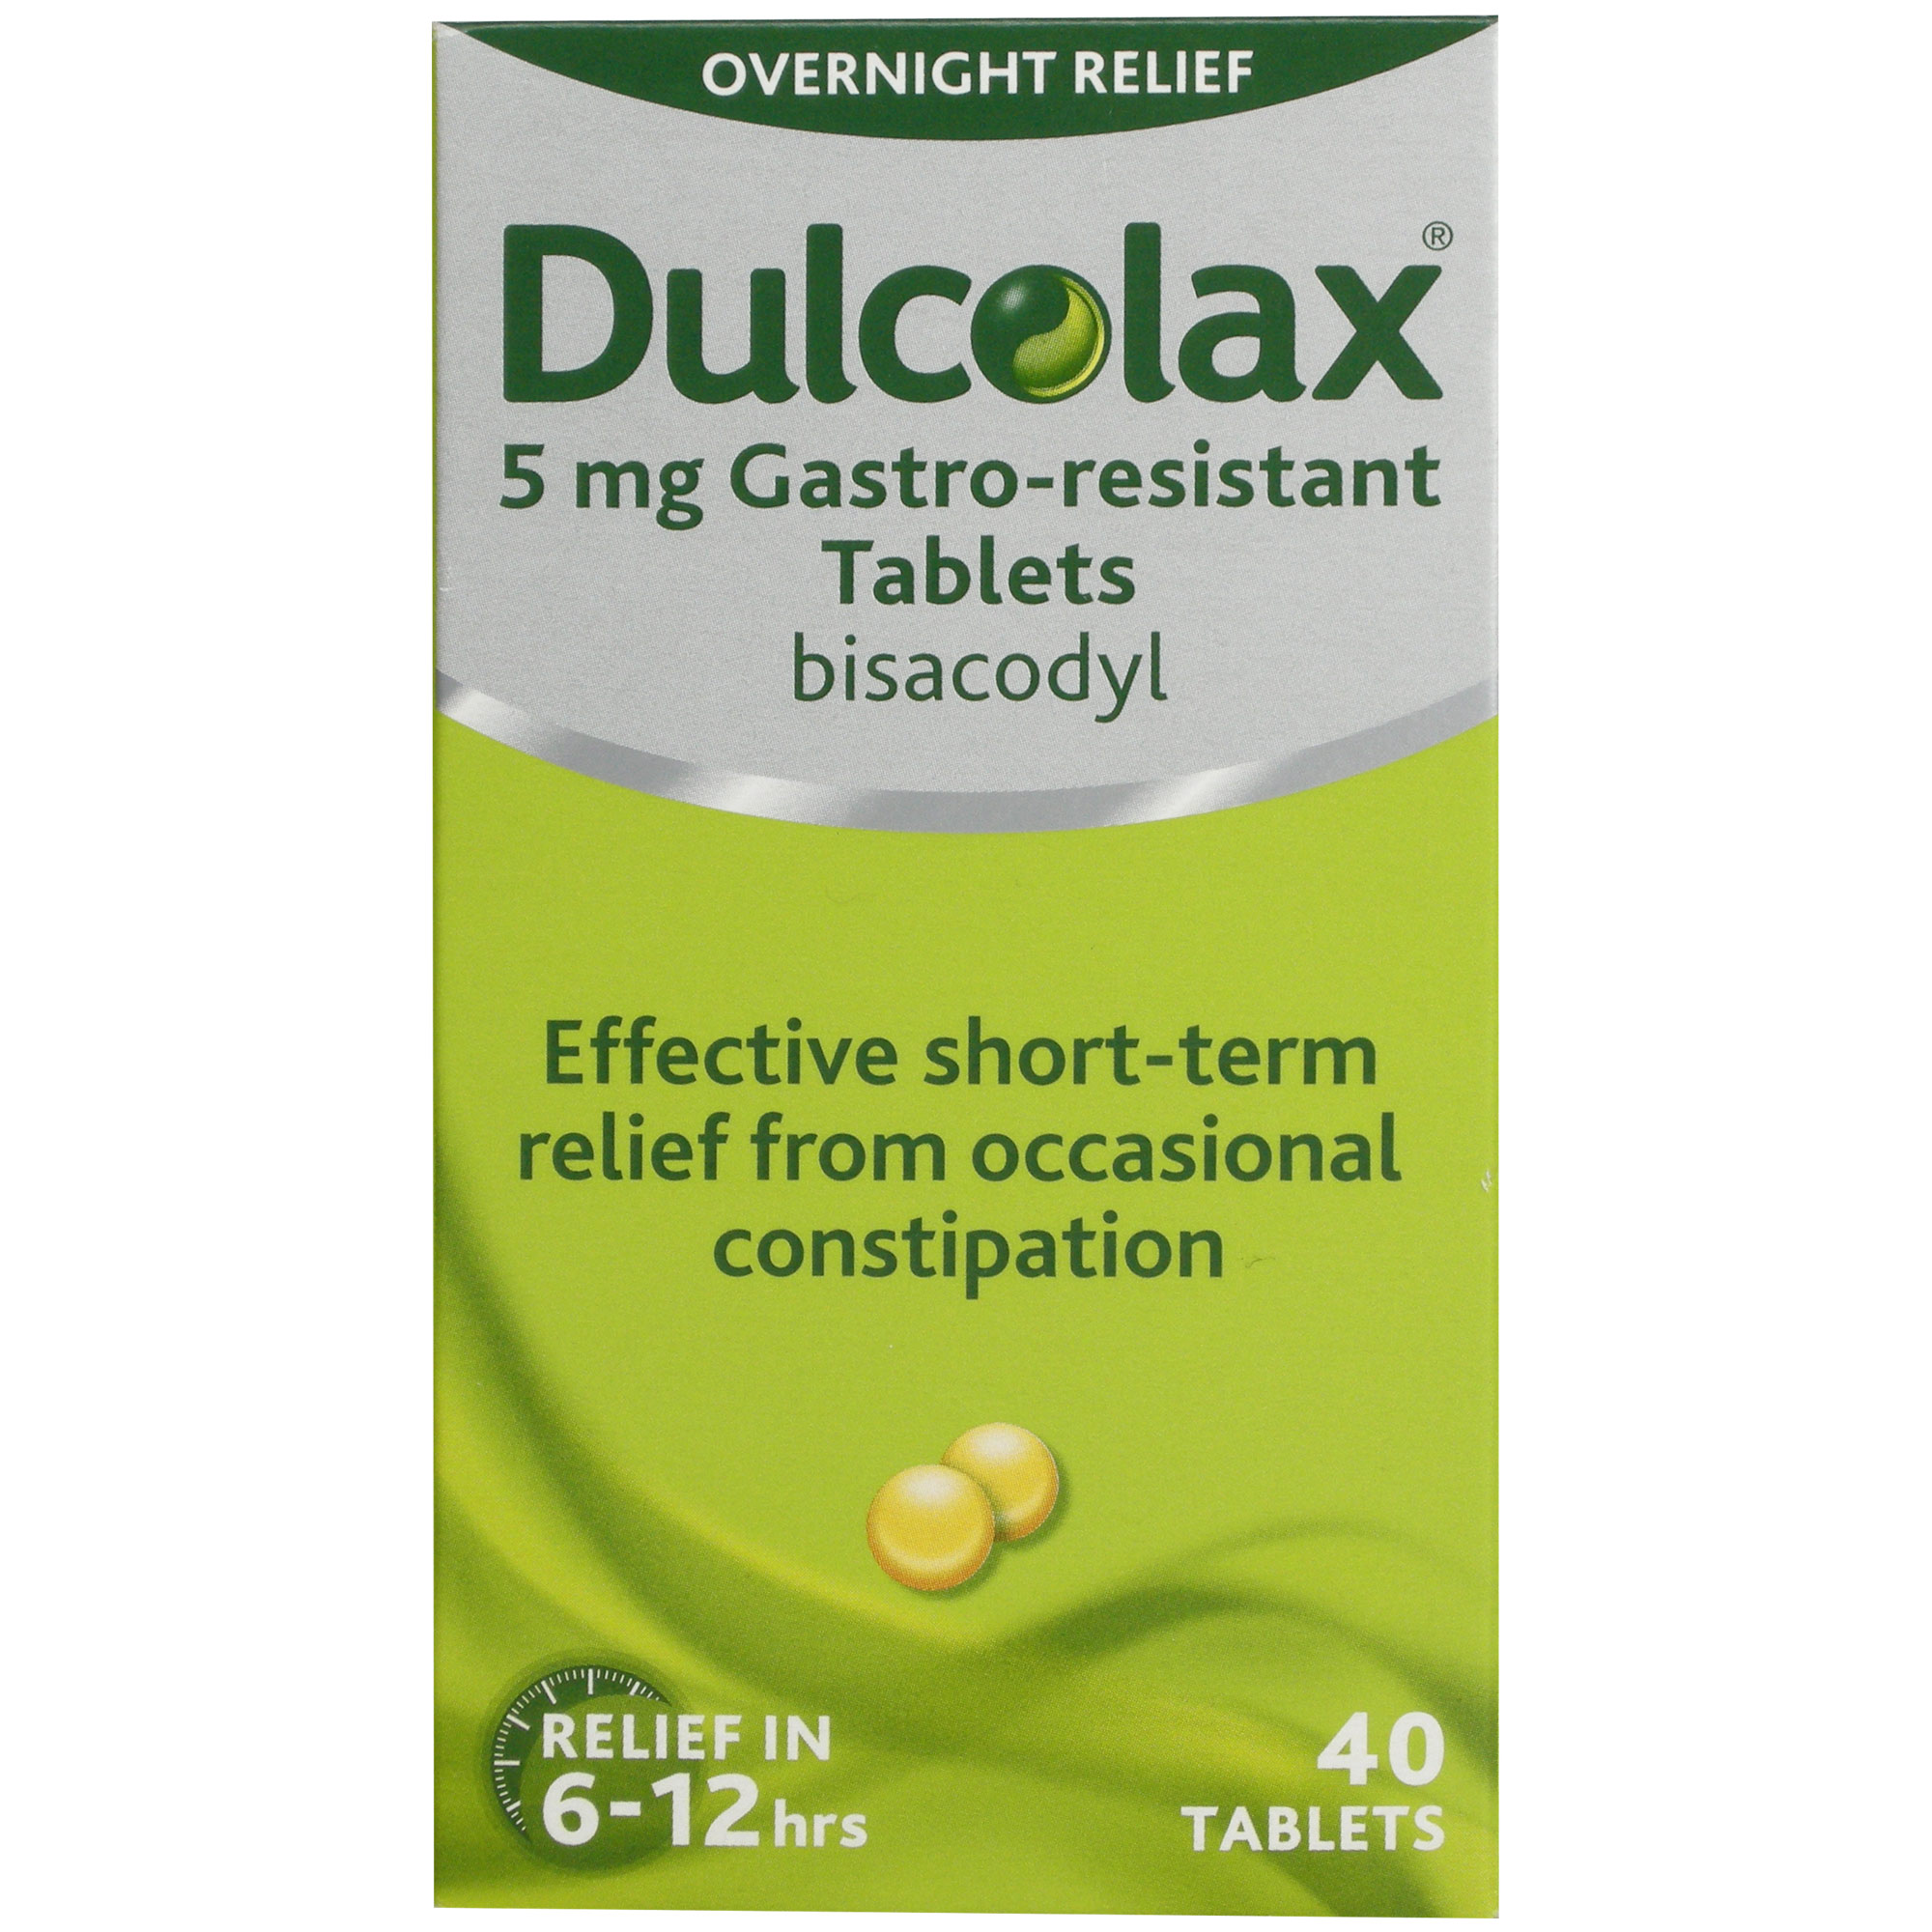 how to take dulcolax 5mg tablets